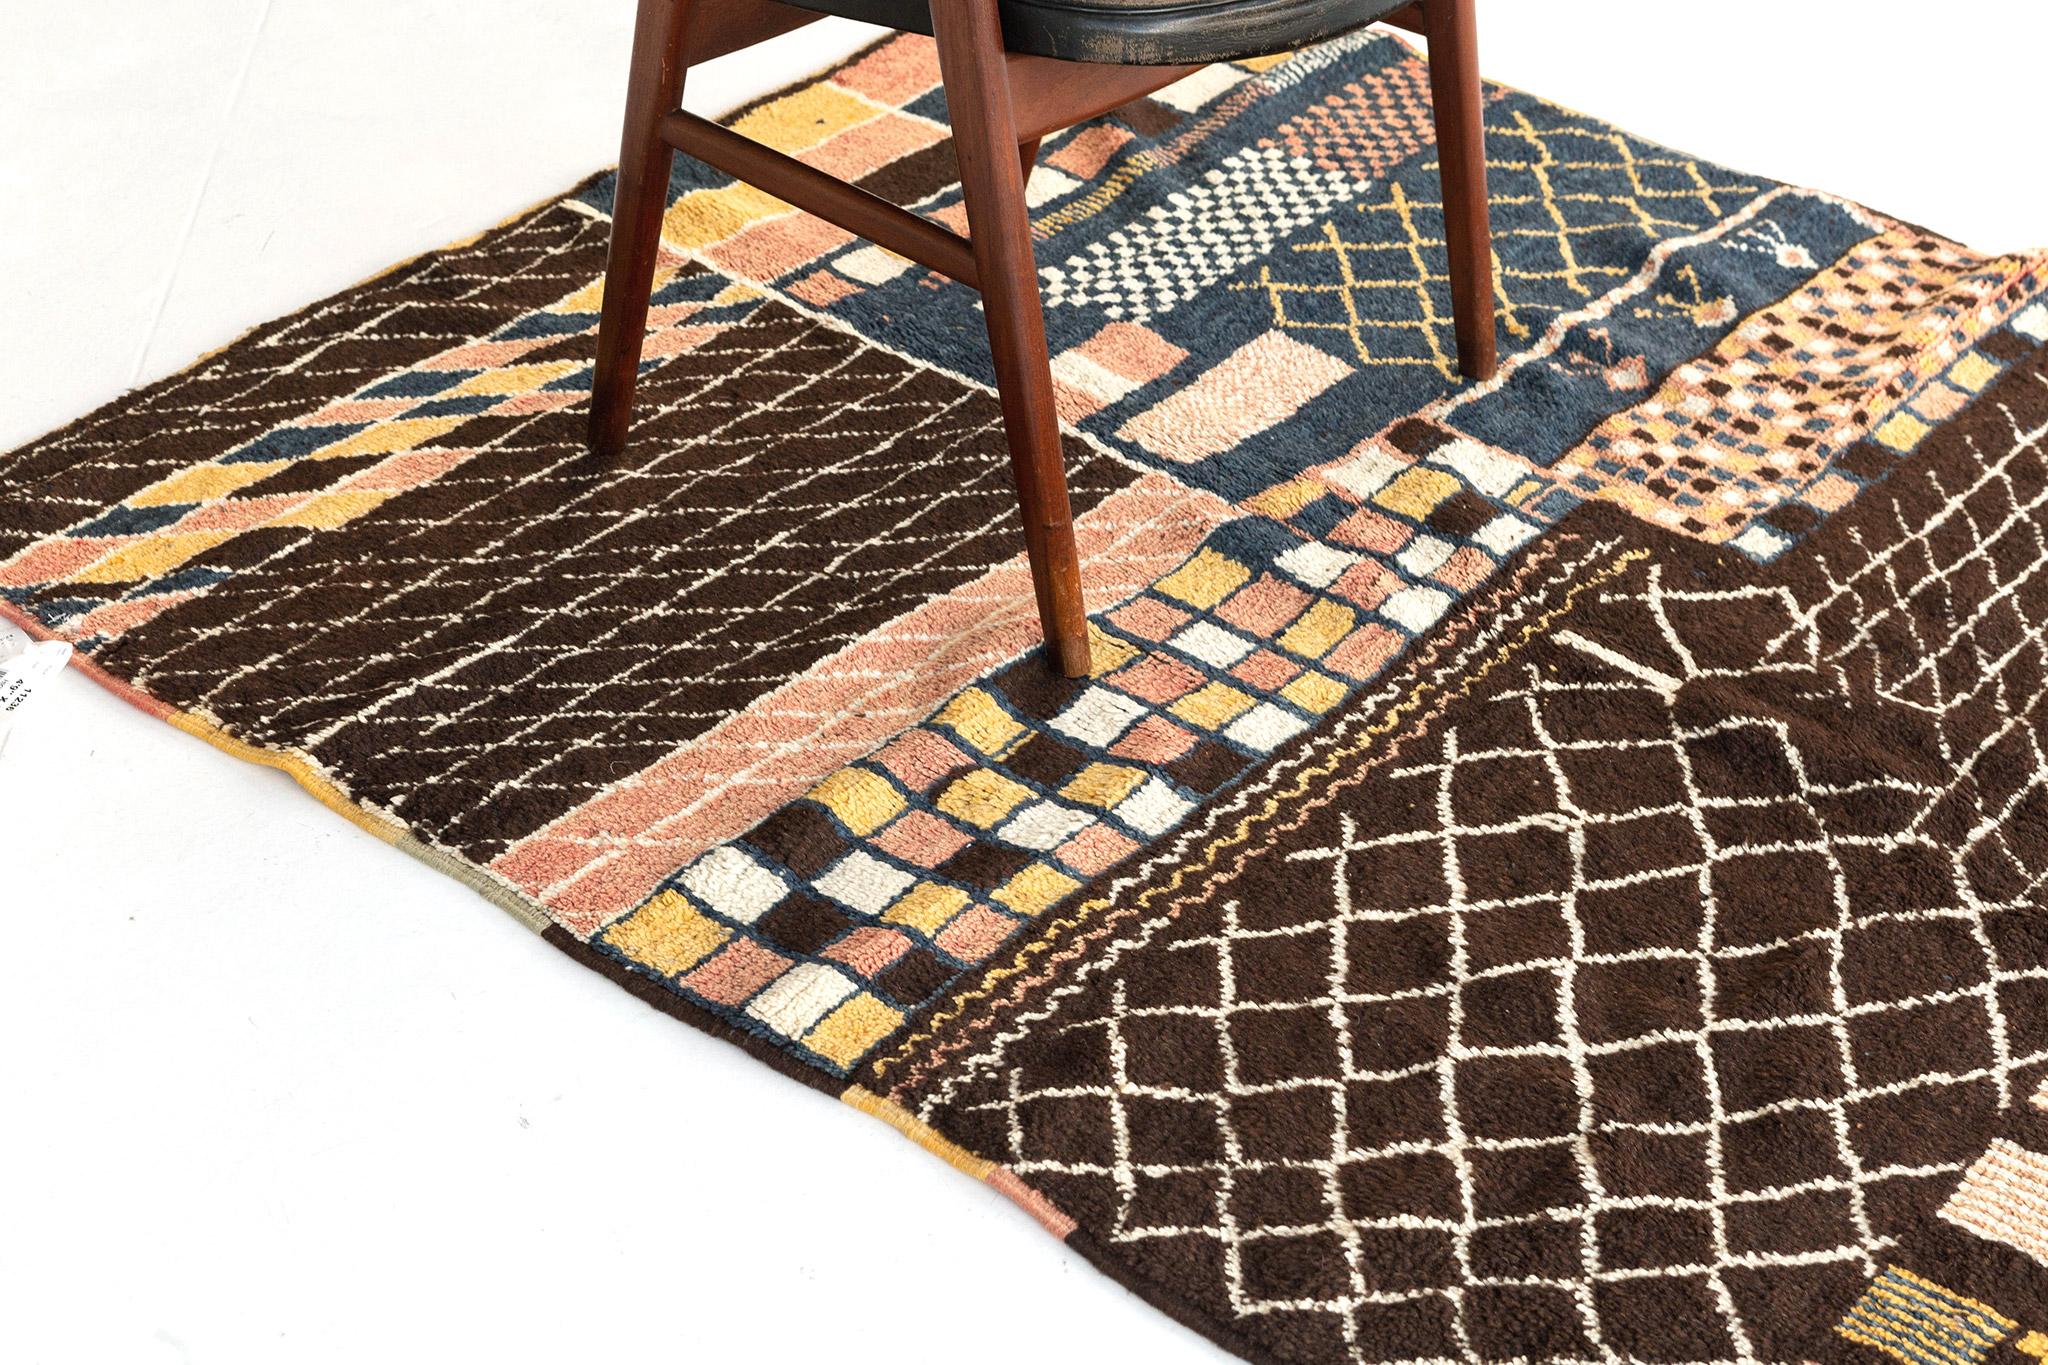 A masterful Moroccan rug in the Atlas Collection overlaid with variegated geometric patterns composed of an array of symbolic Berber motifs. The abrashed chocolate brown field highlights a myriad of ambiguous organic shapes in the most sought after